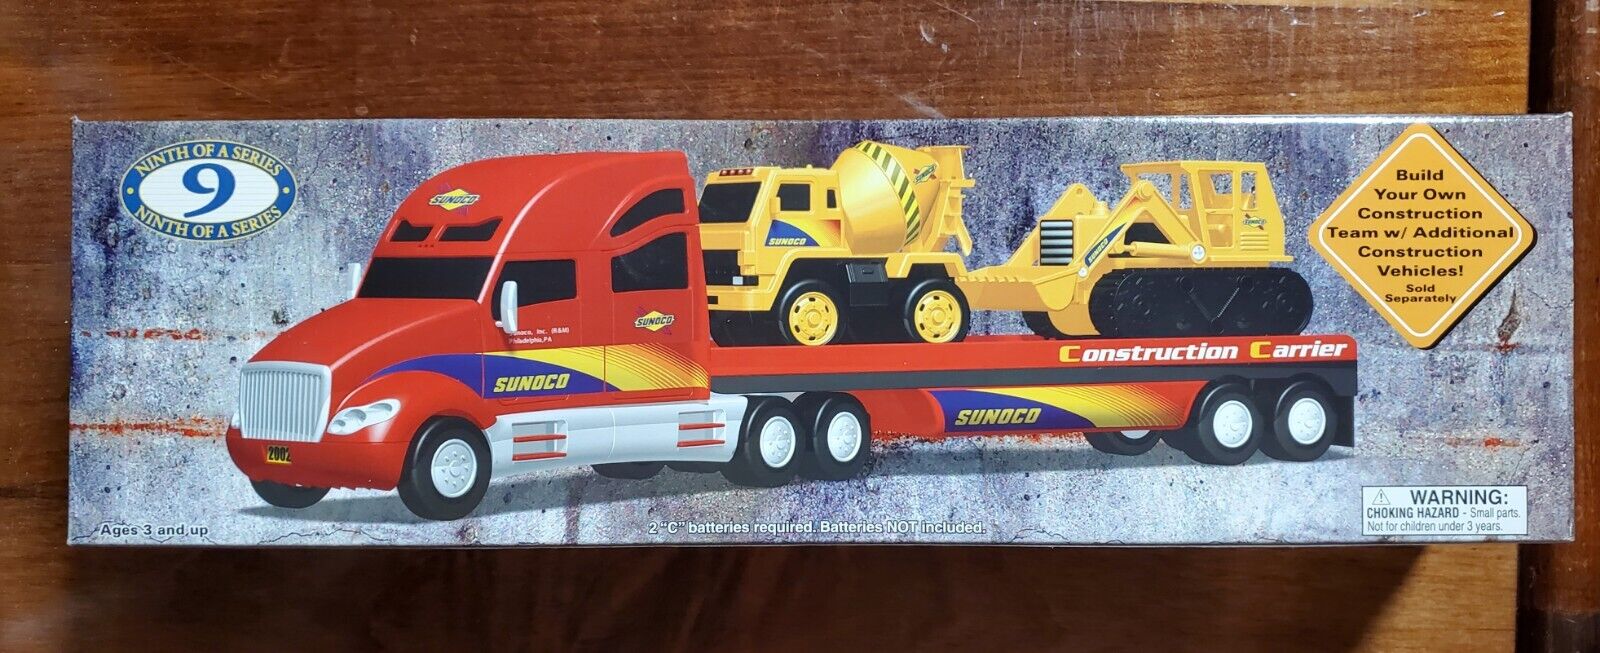 Sunoco 2002 Construction Carrier Truck Ninth Of A Series New In Box